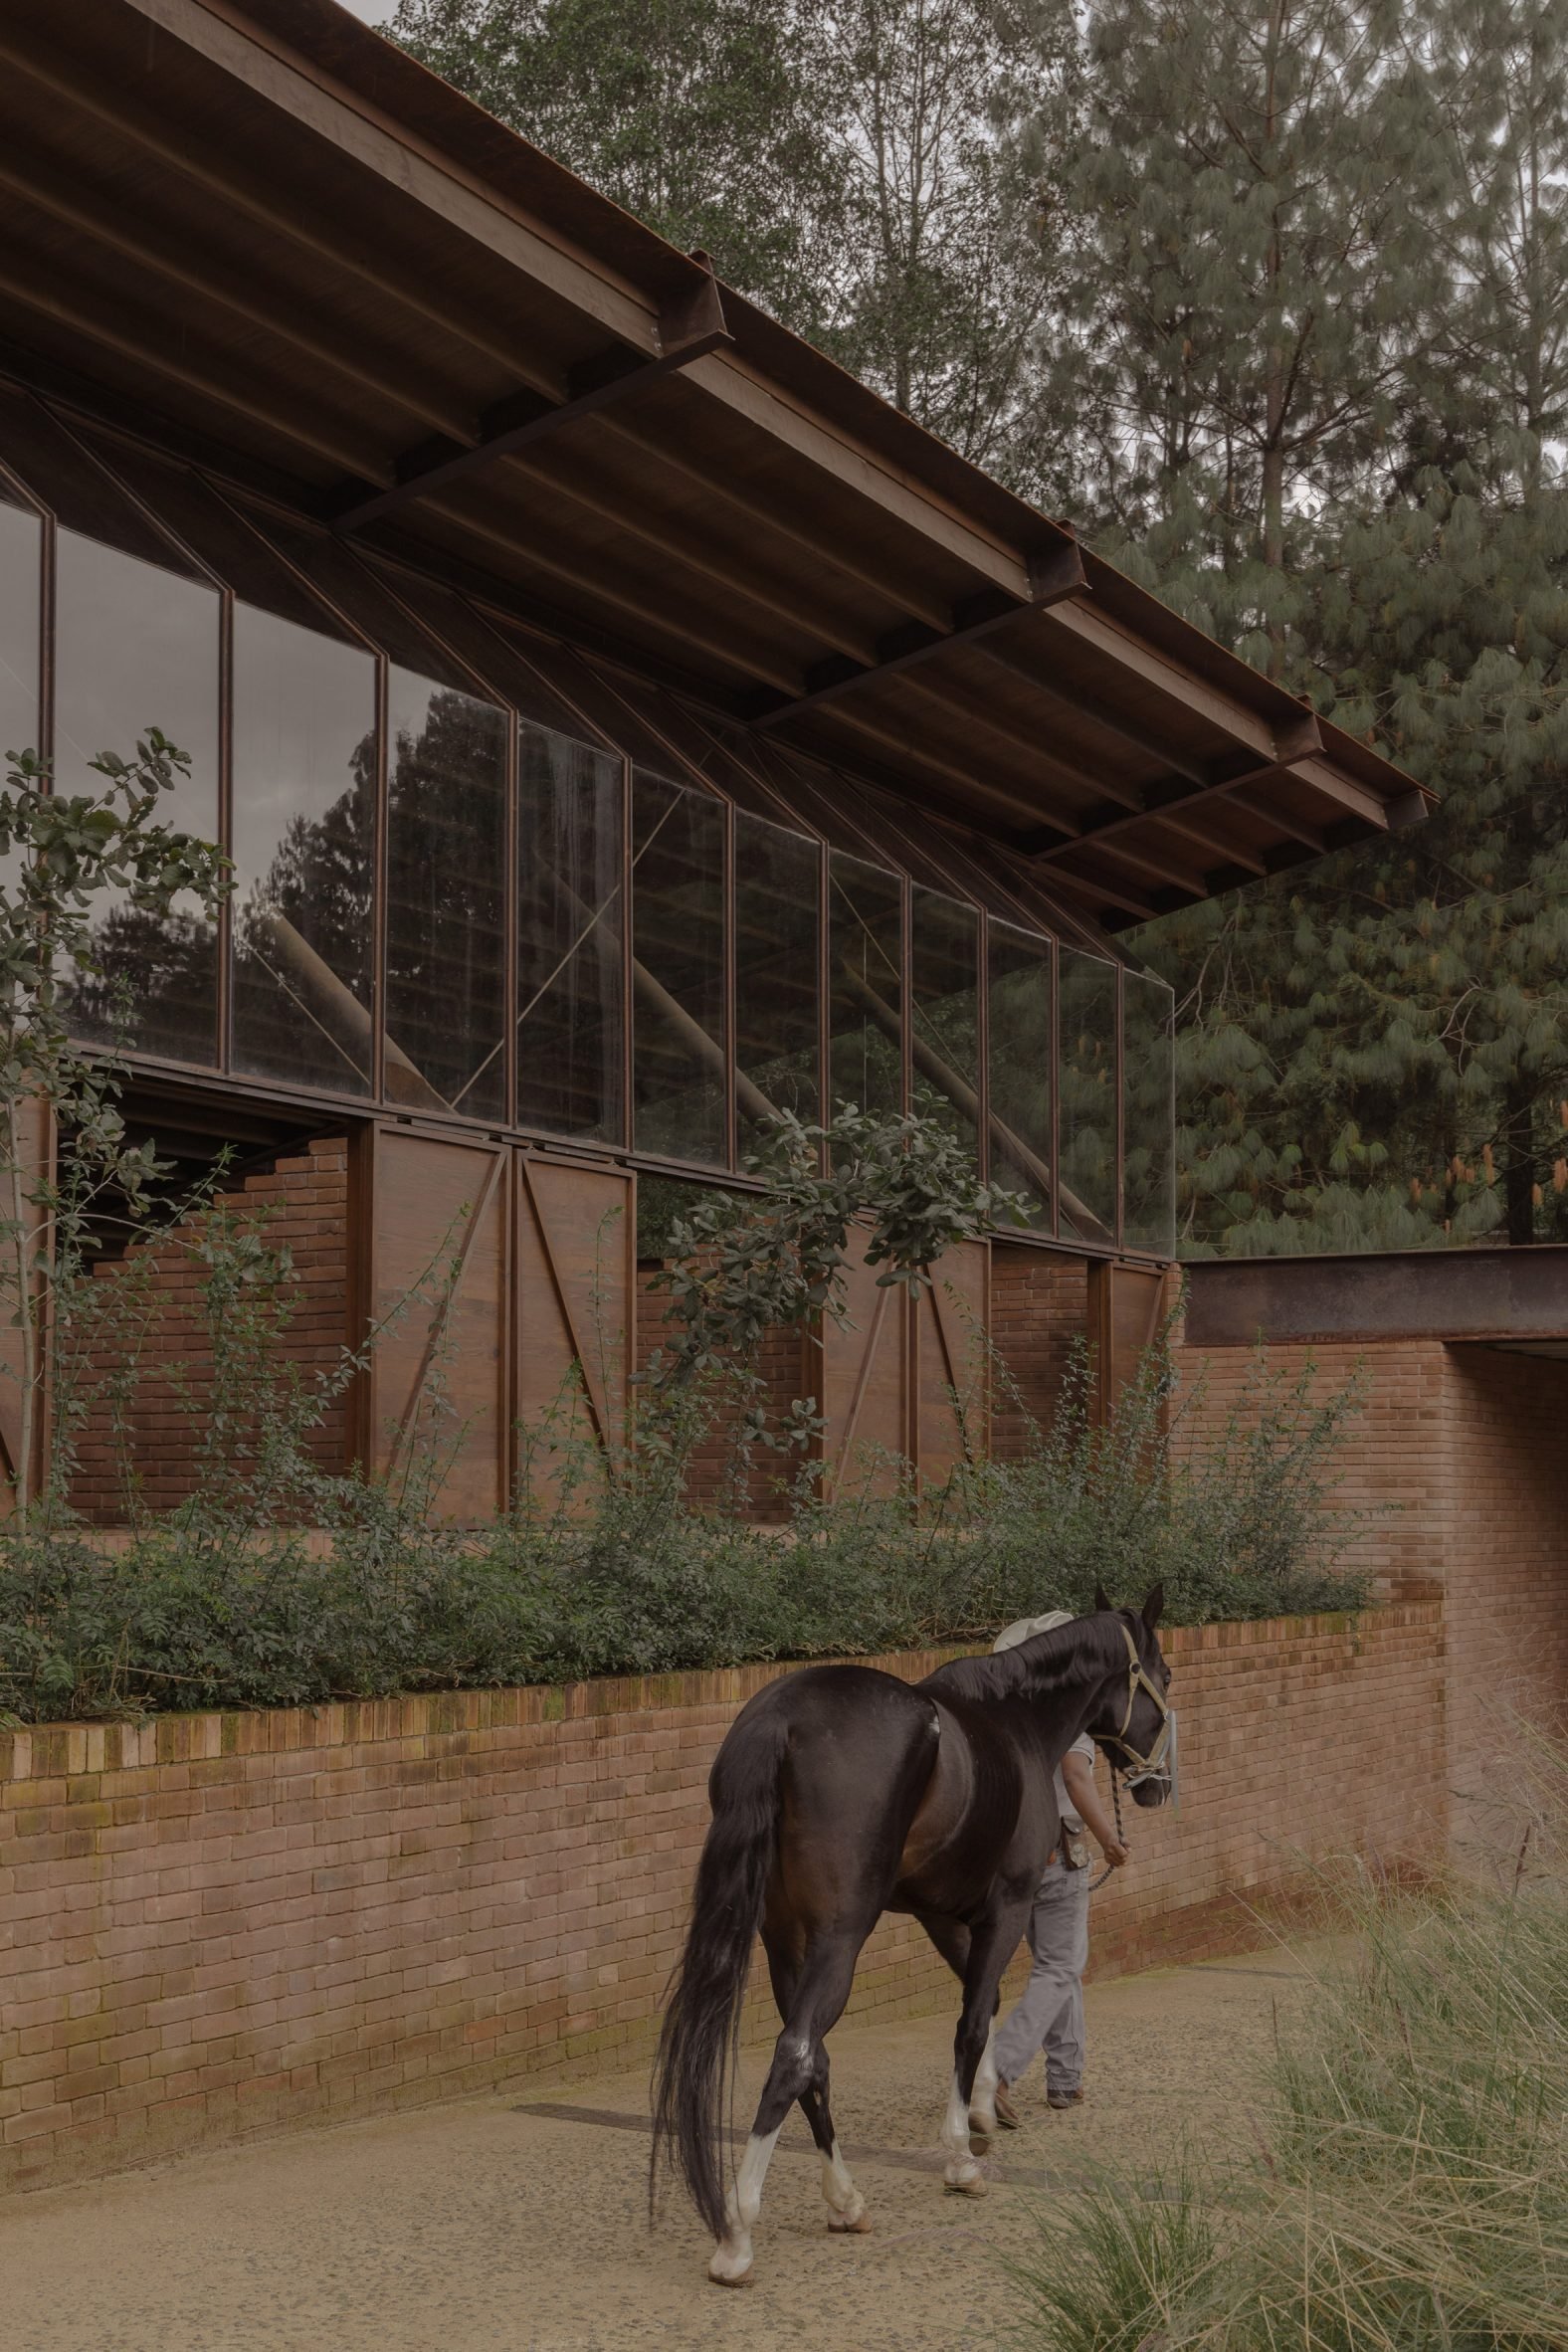 Horse led along a pathway in front of a stable building